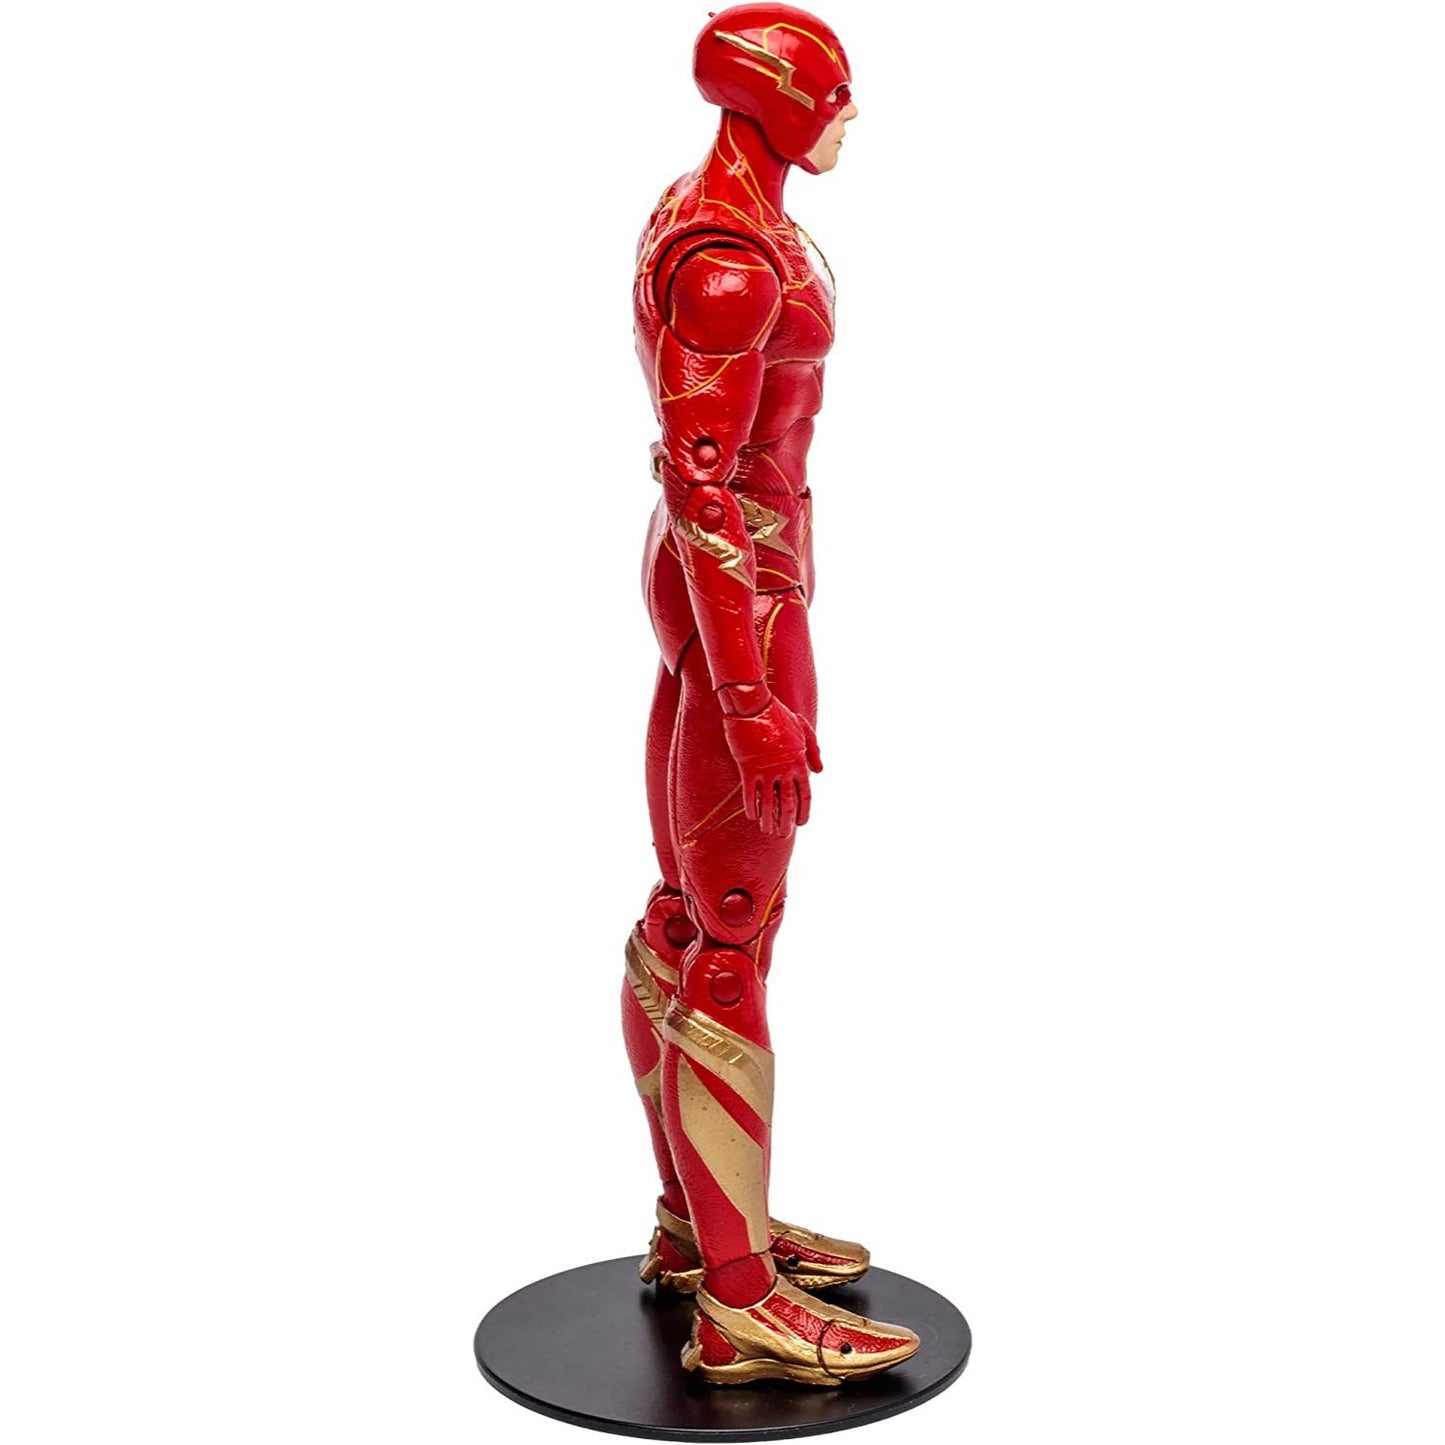 DC Multiverse - The Flash Movie - The Flash Action Figure 7INCh Toy right side Pose- Heretoserveyou